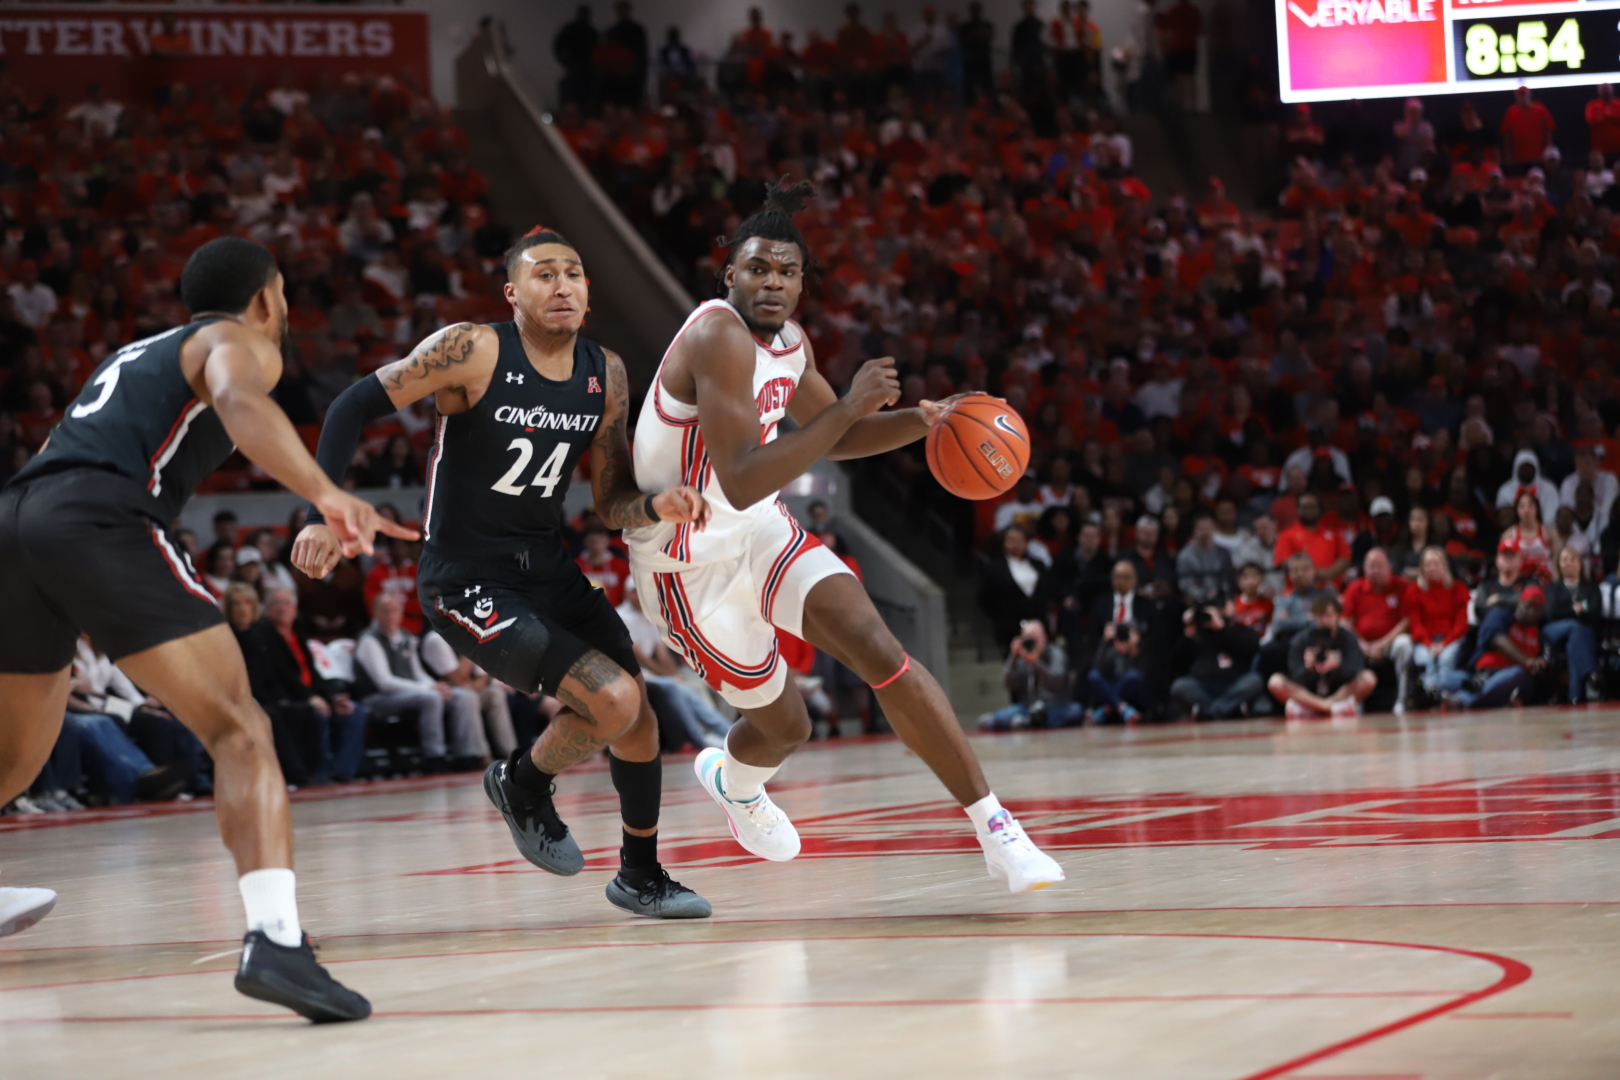 UH freshman forward Jarace Walker scored a career-high 25 points in the Cougars' victory over Cincinnati on Saturday afternoon at Fertitta Center. | Anh Le/The Cougar